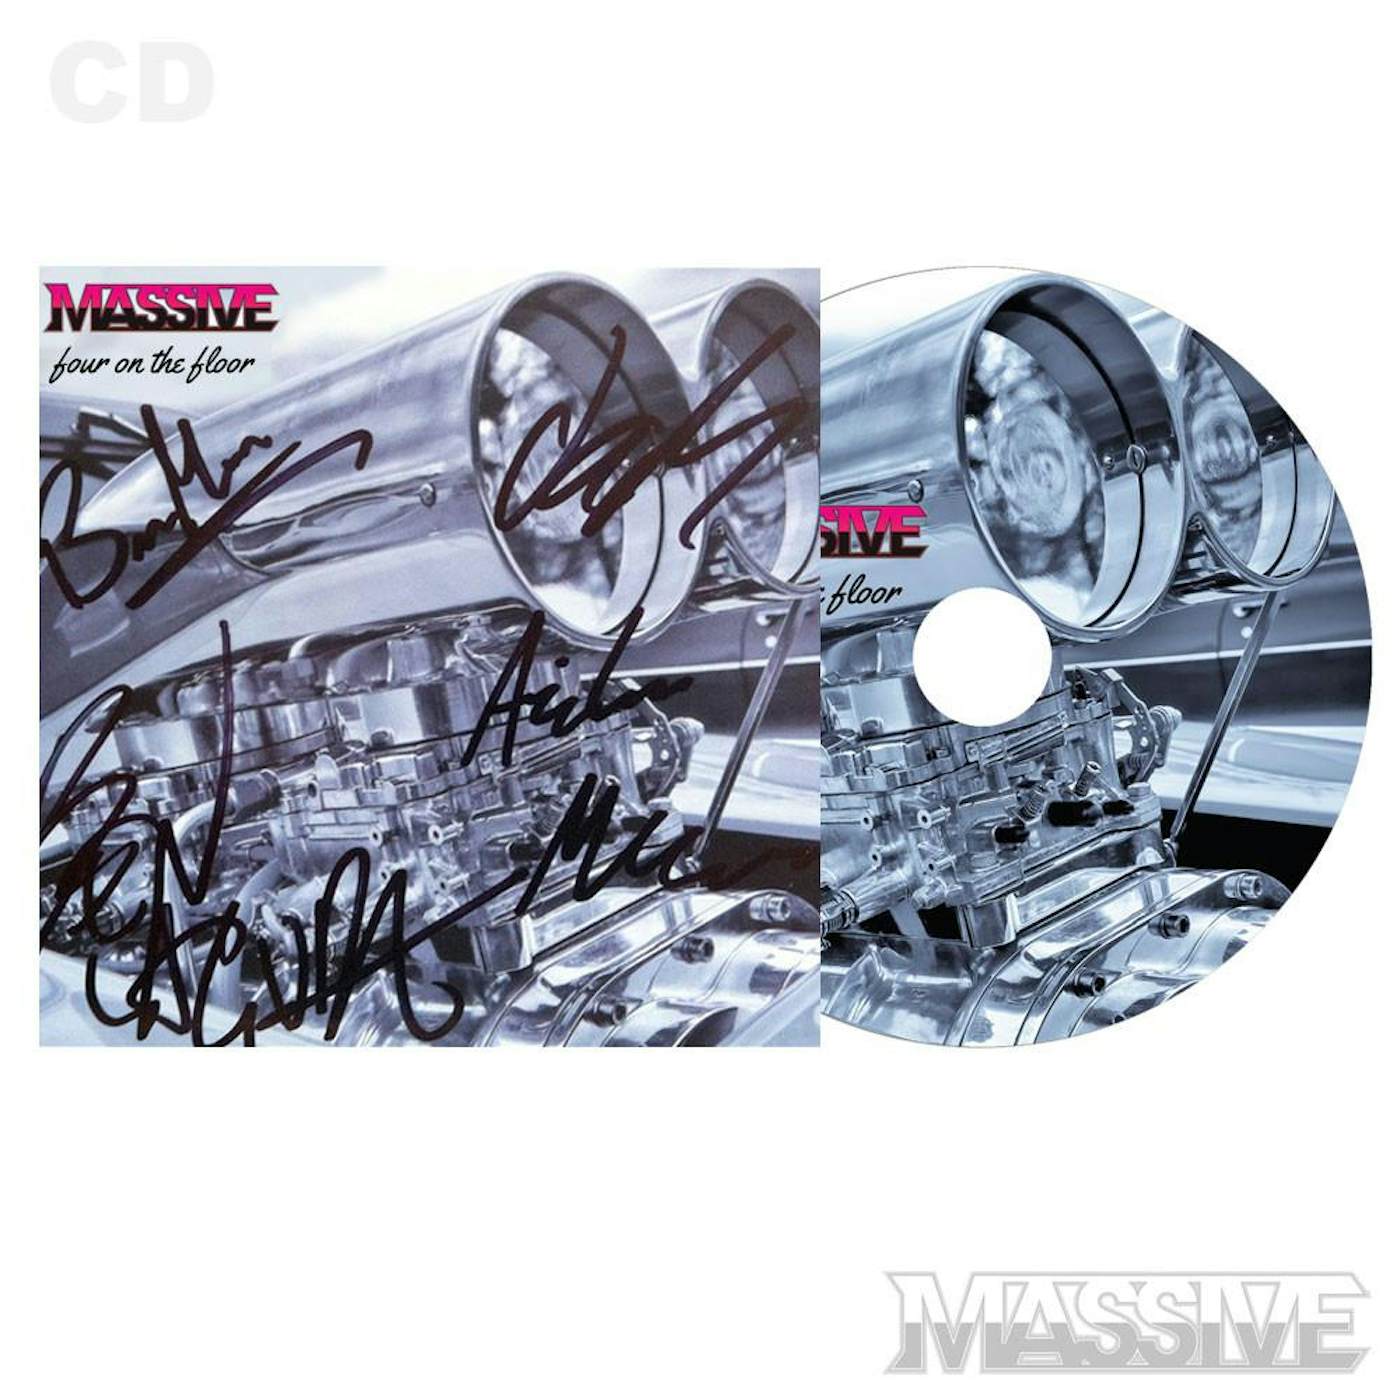 Massive Four On The Floor CD EP - Signed